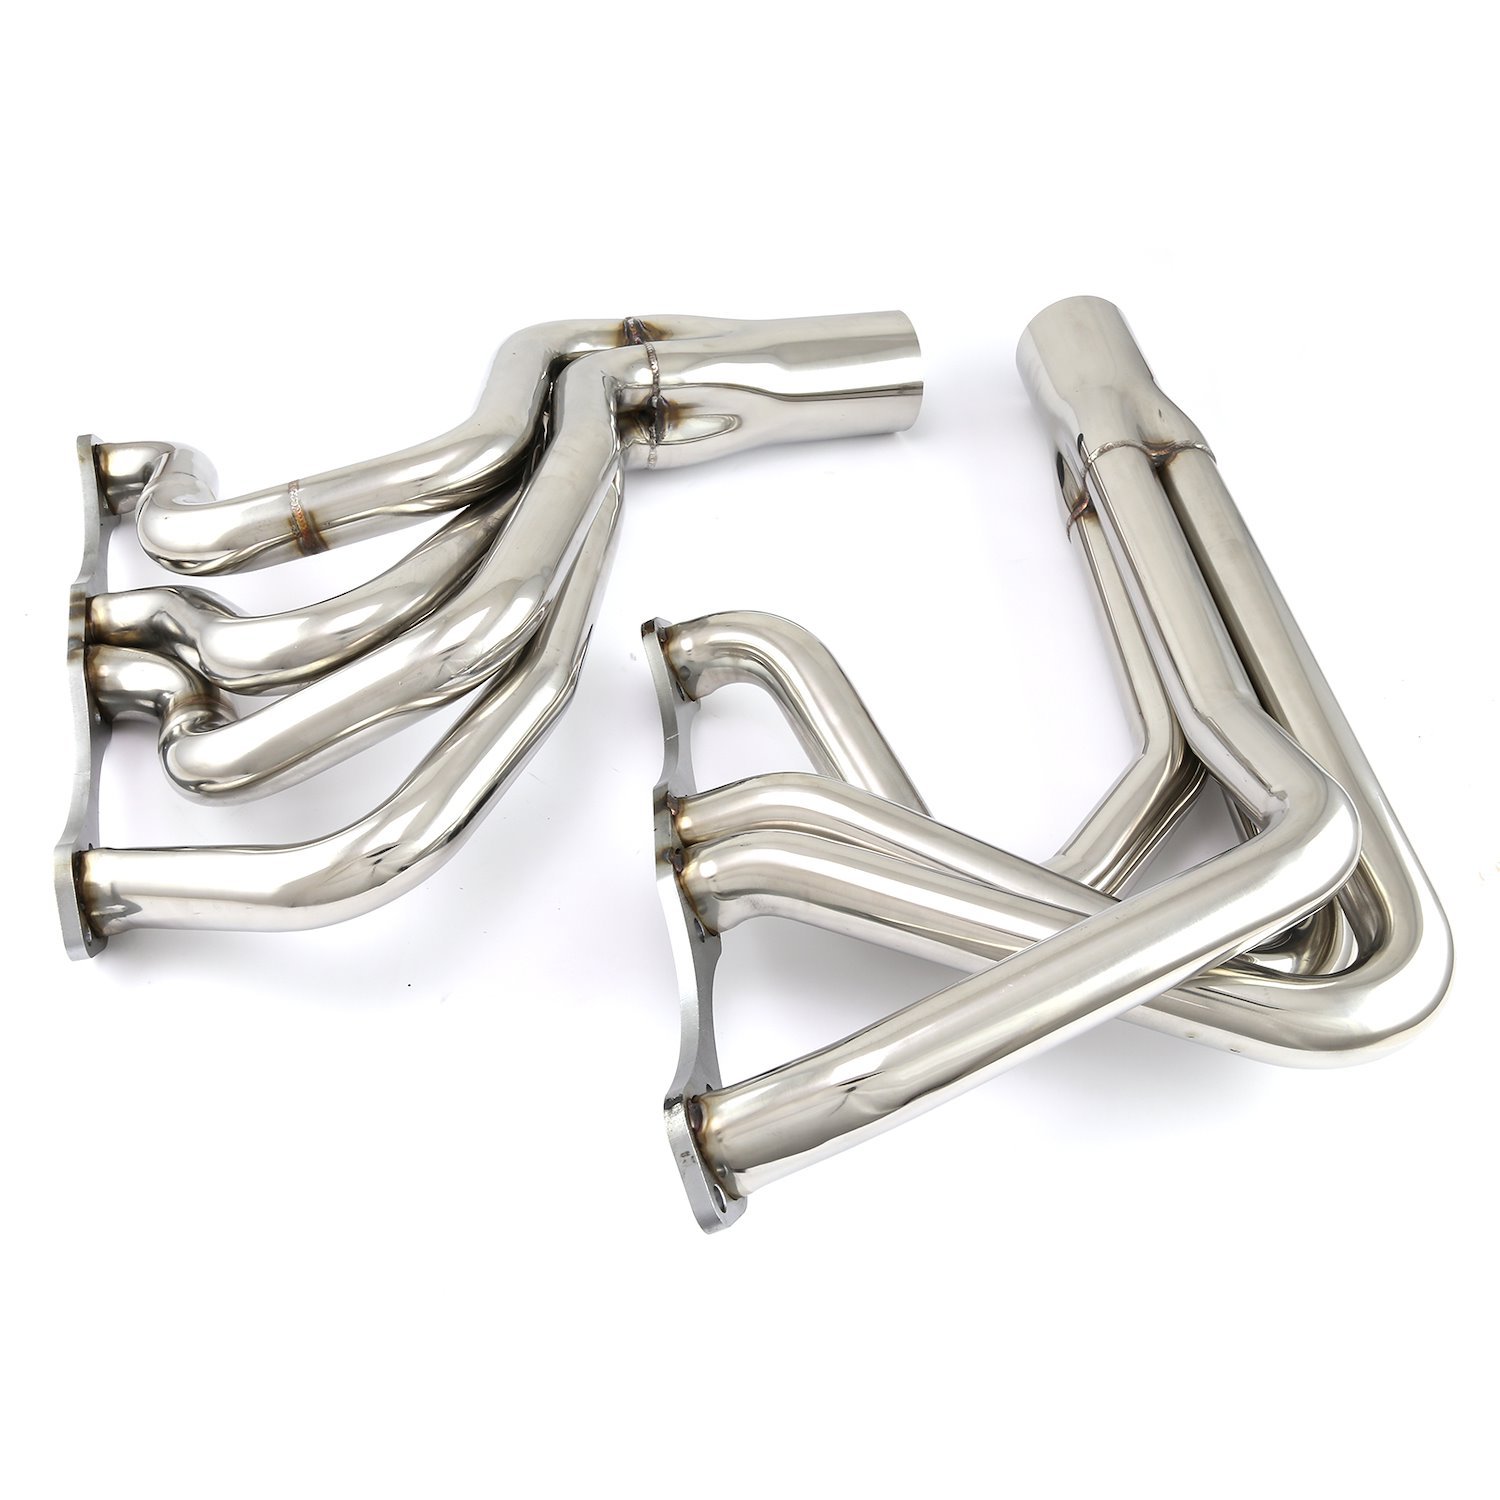 Chevy SBC 350 IMCA MODIFIED Stainless Steel Exhaust Headers